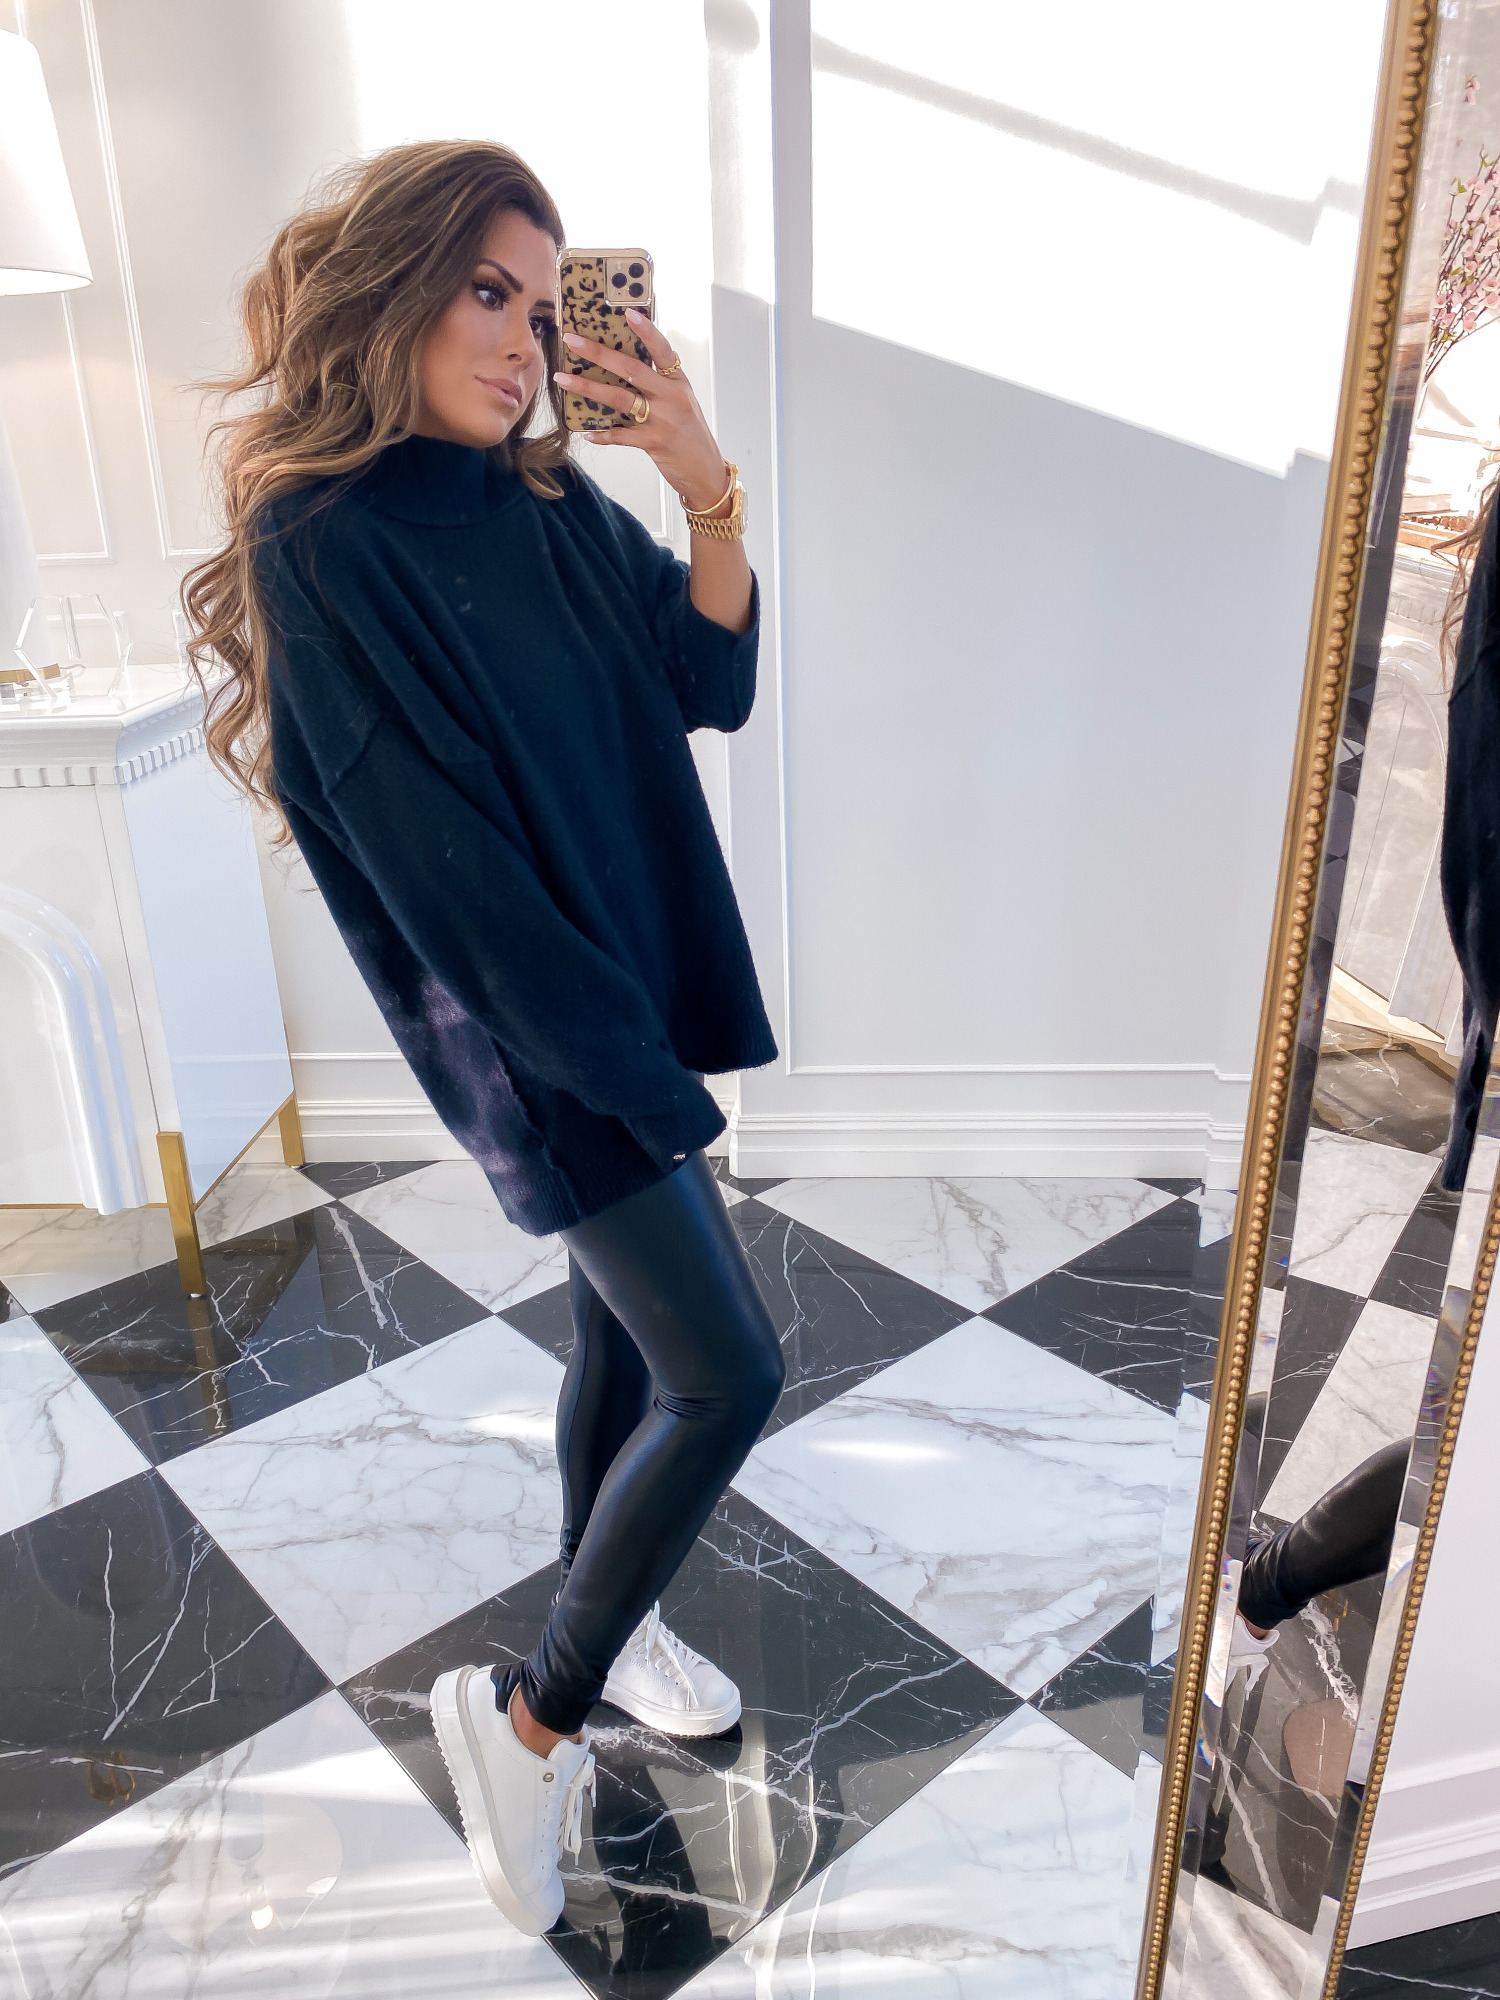 Nsale 2020 try on hauls fall outfits, NSALE 2020 must haves blog post, emily gemma | Nordstrom Anniversary Sale by popular US fashion blog, The Sweetest Thing: image of Emily Gemma wearing a Steve Madden Charlie Platform Sneaker, Faux Leather Ankle Leggings COMMANDO, and Free People Afterglow Mock Neck Top.